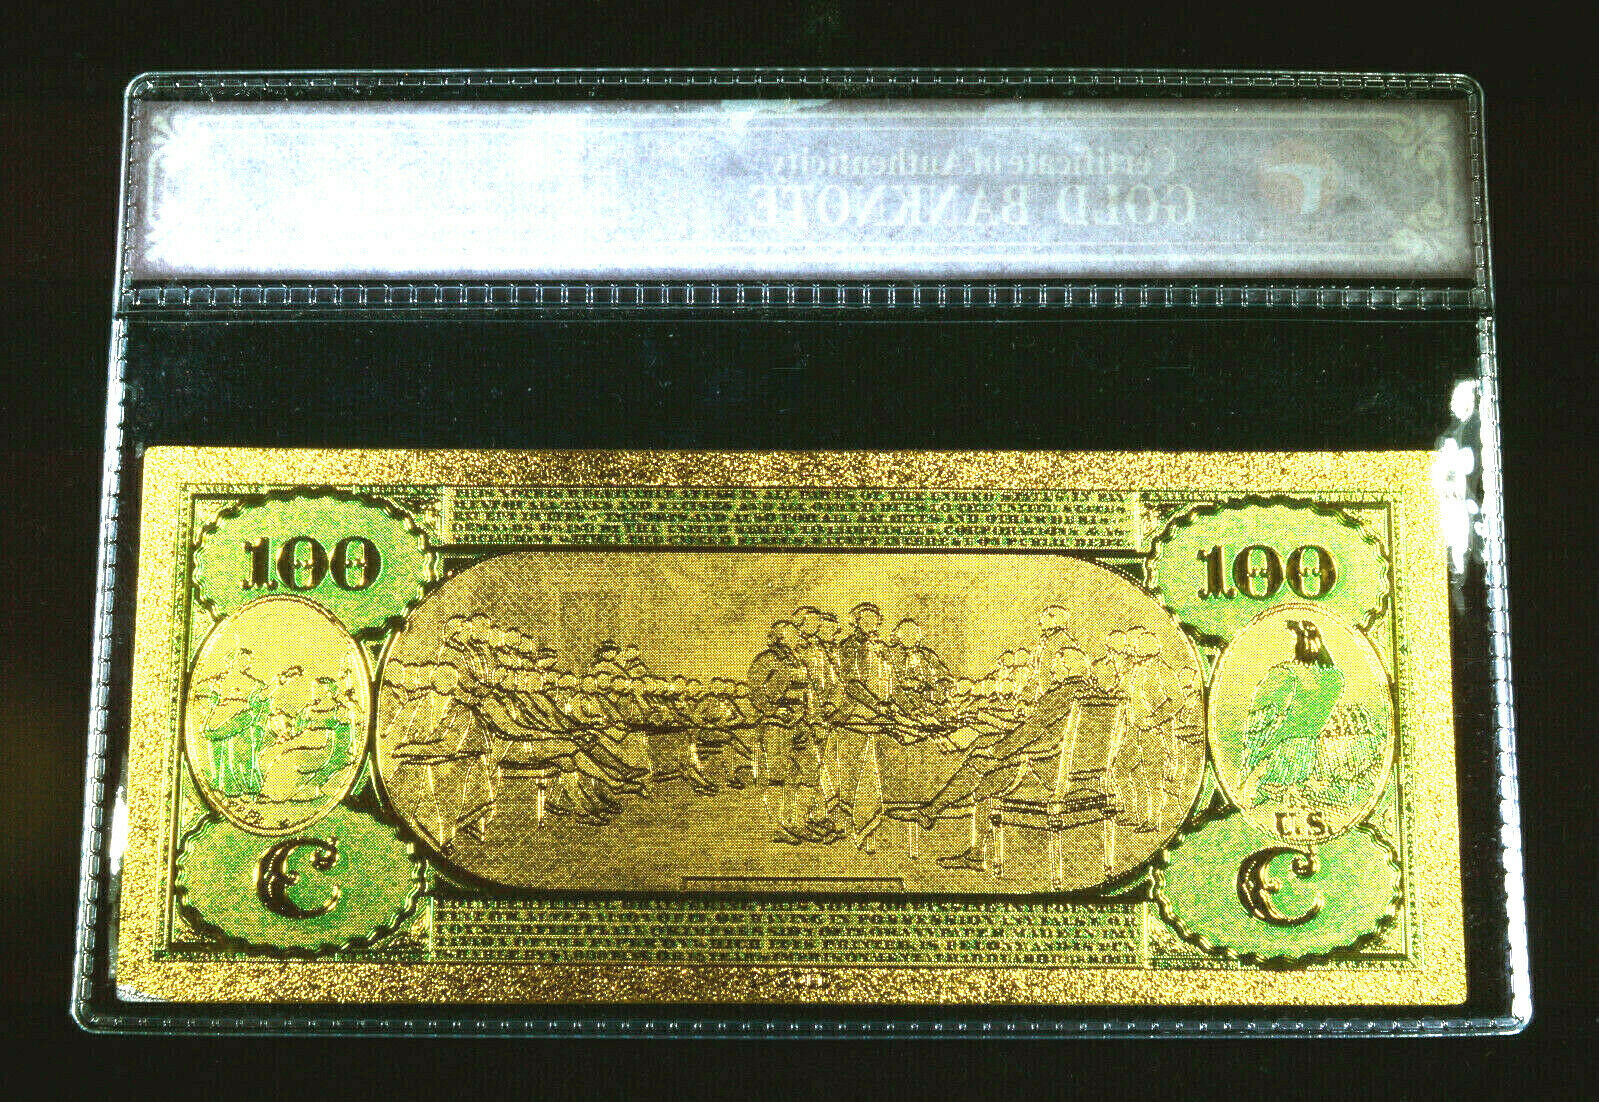 99.9% 24K GOLD 1875 $100 BILL US BANKNOTE IN PROTECTIVE SLEEVE W COA